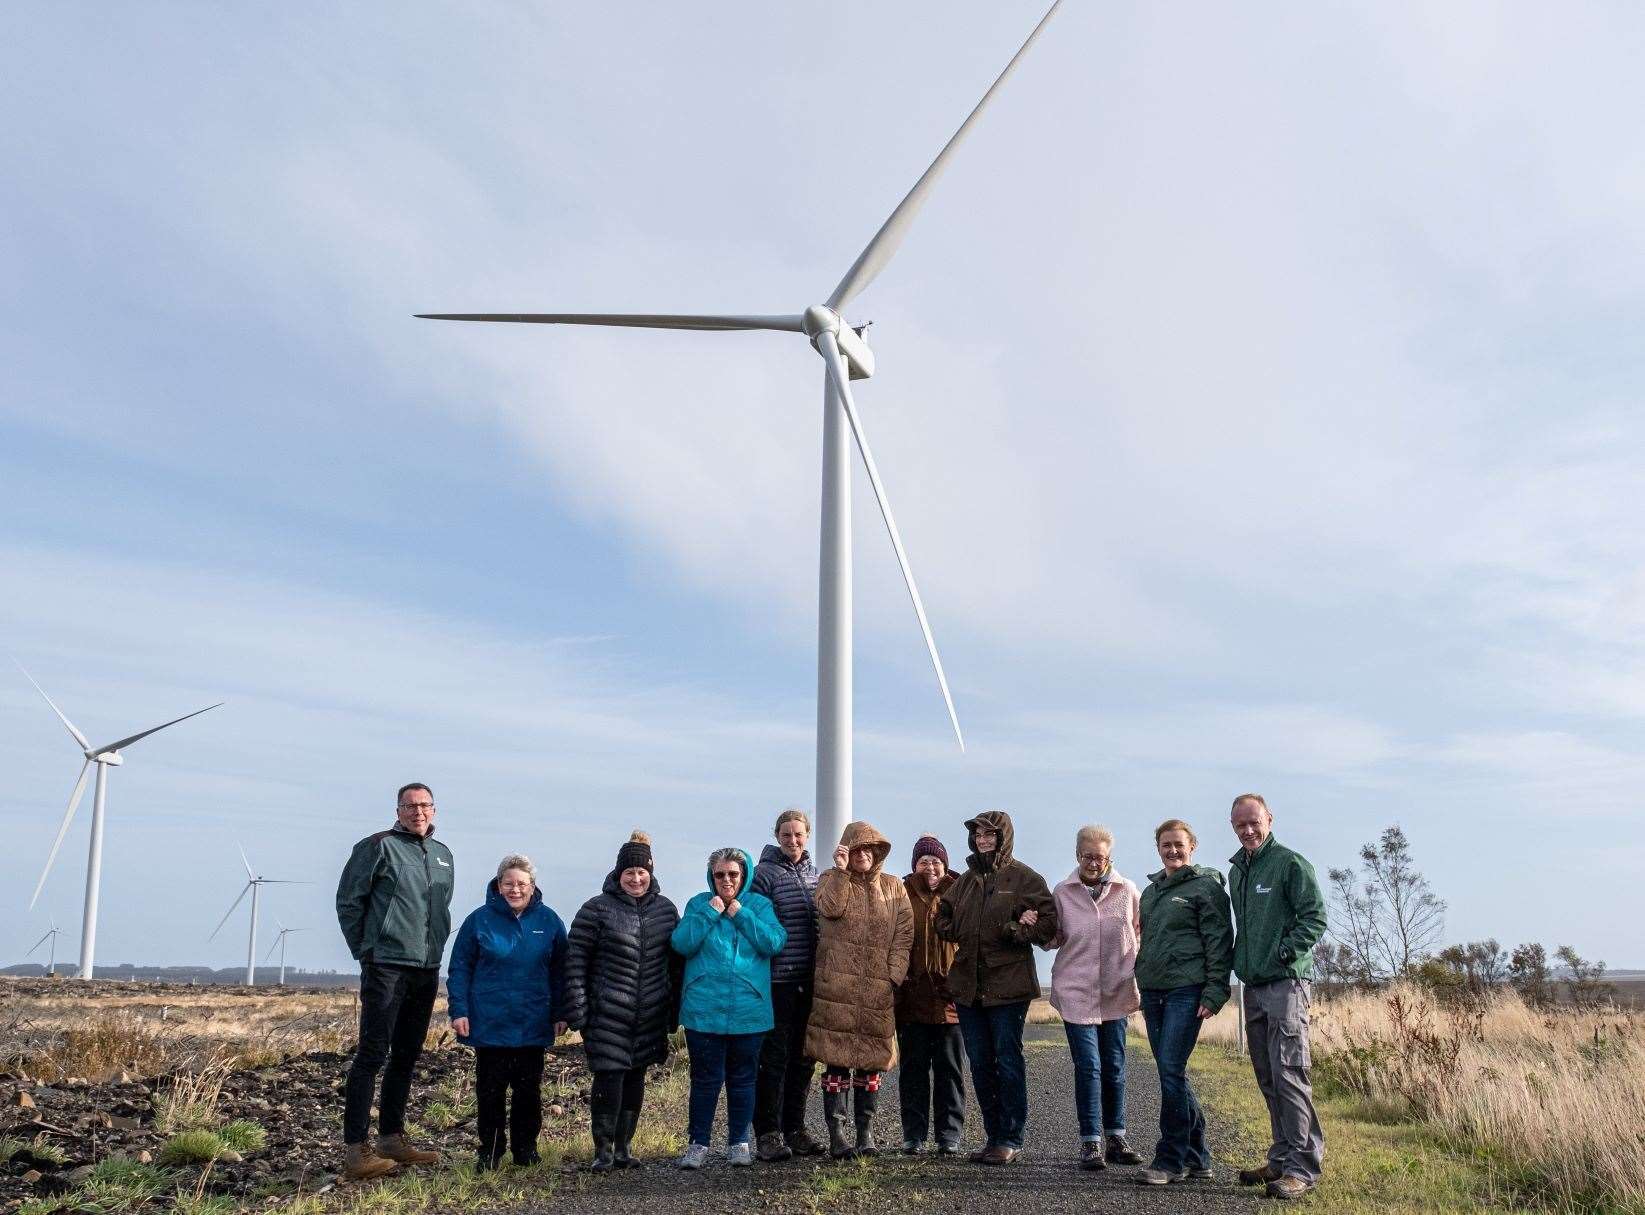 Community representatives from across Caithness joined ScottishPower Renewables at Halsary wind farm to launch the £3.75 million community benefit fund last year.